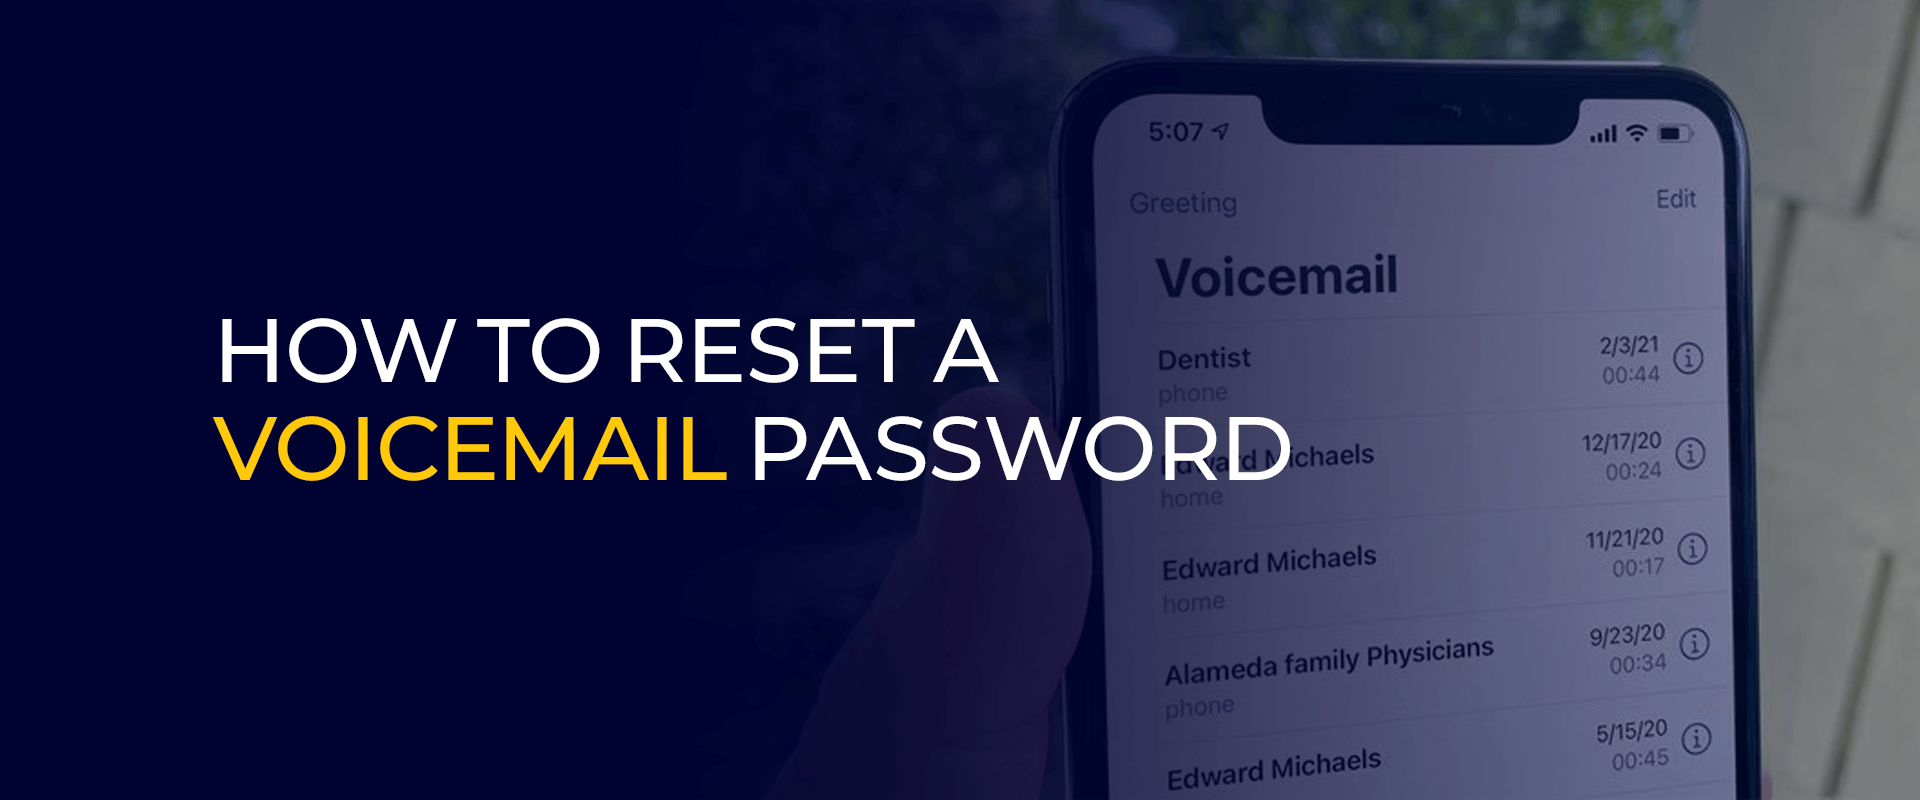 How to Reset a Voicemail Password